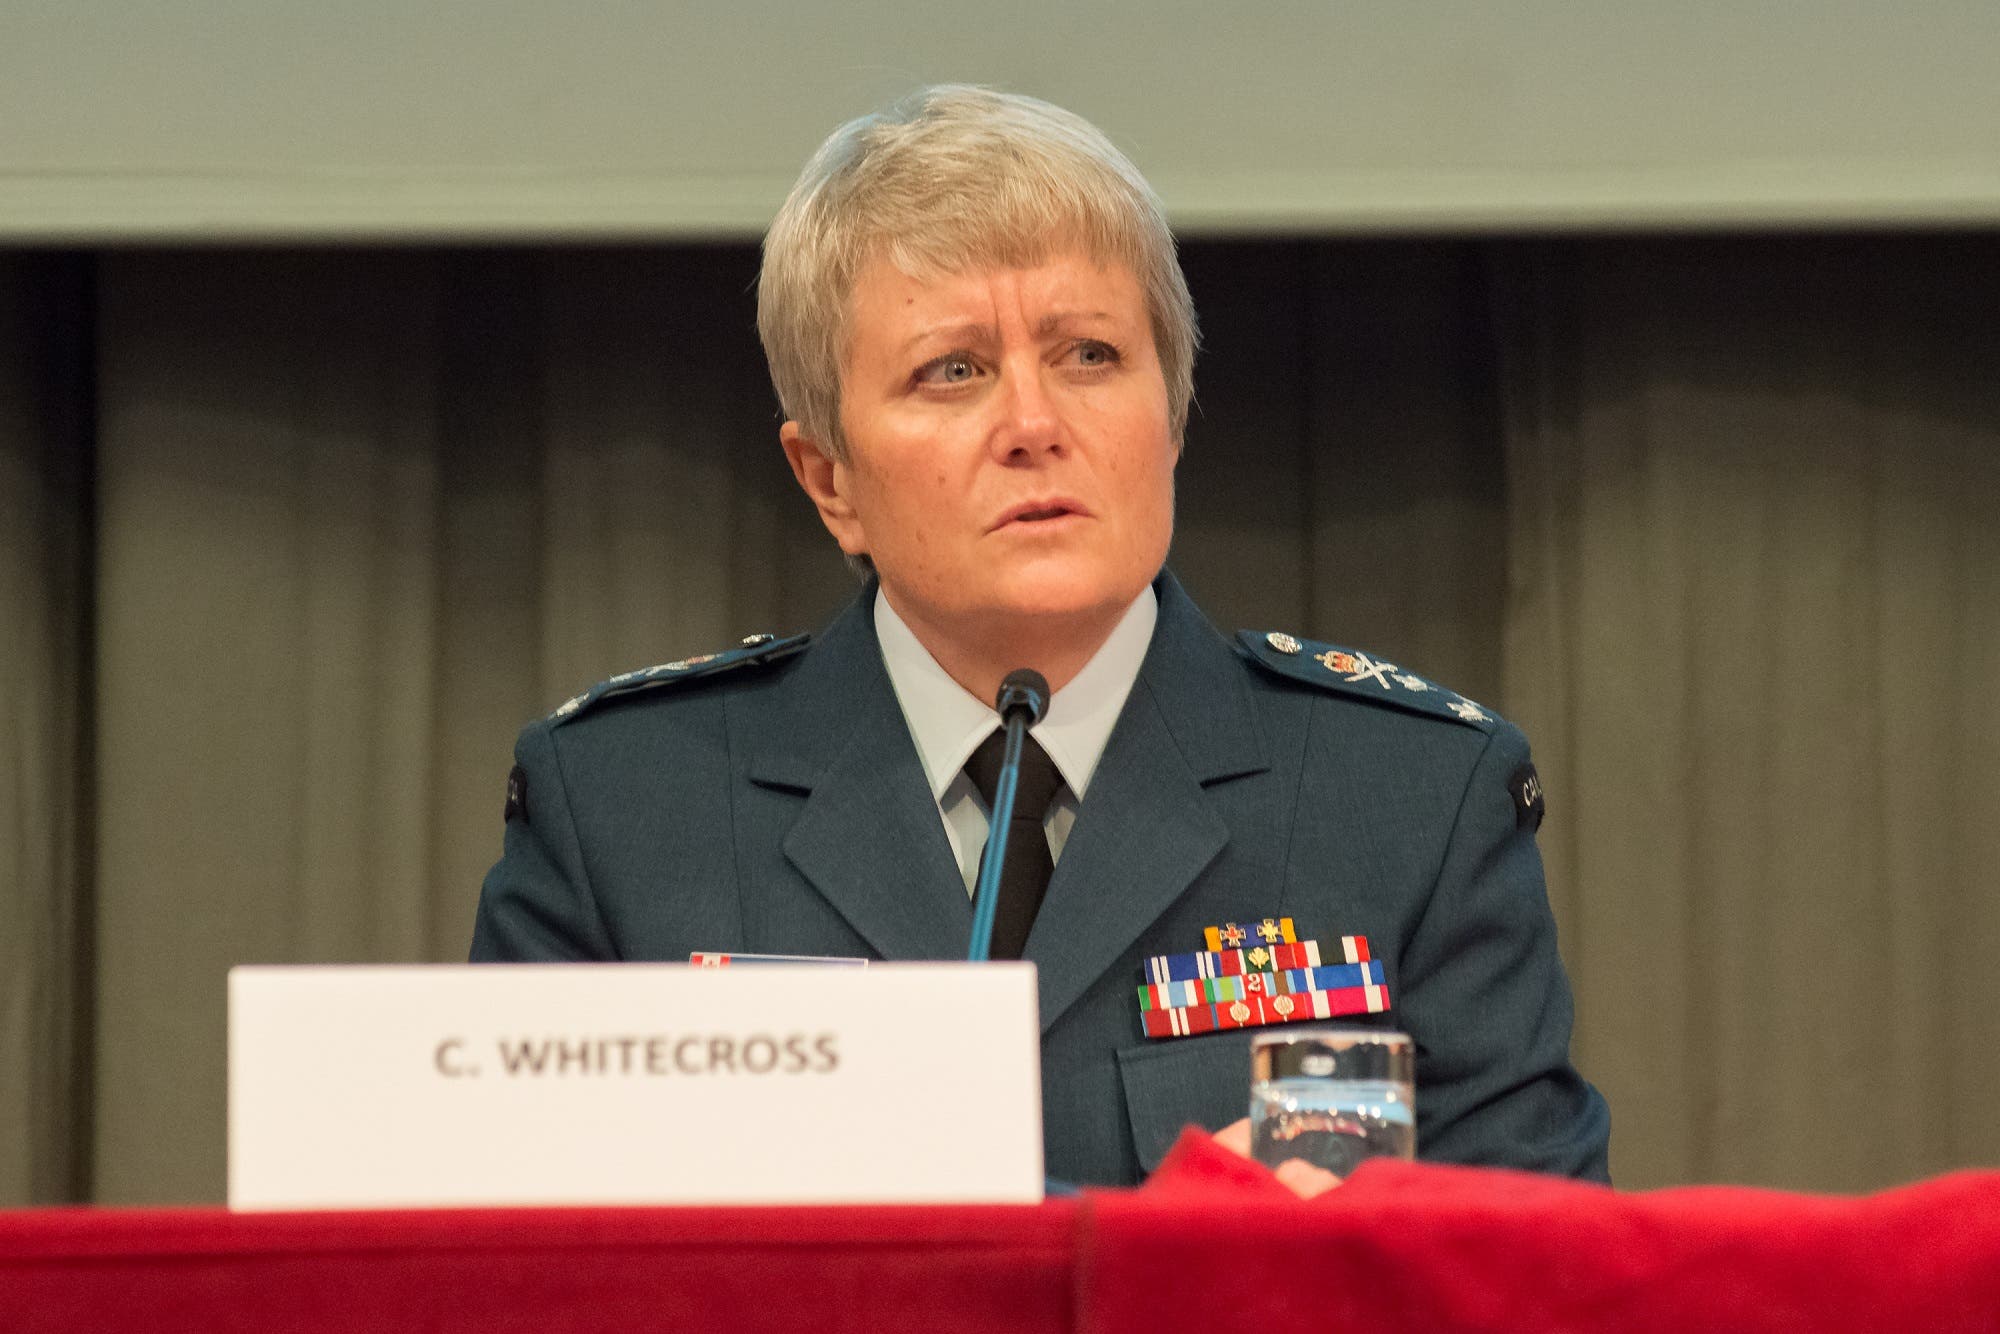 “I lived through it and I have been following the trial with great interest,” NATO Defense College Commandant, Chris Whitecross, told Al Arabiya English.